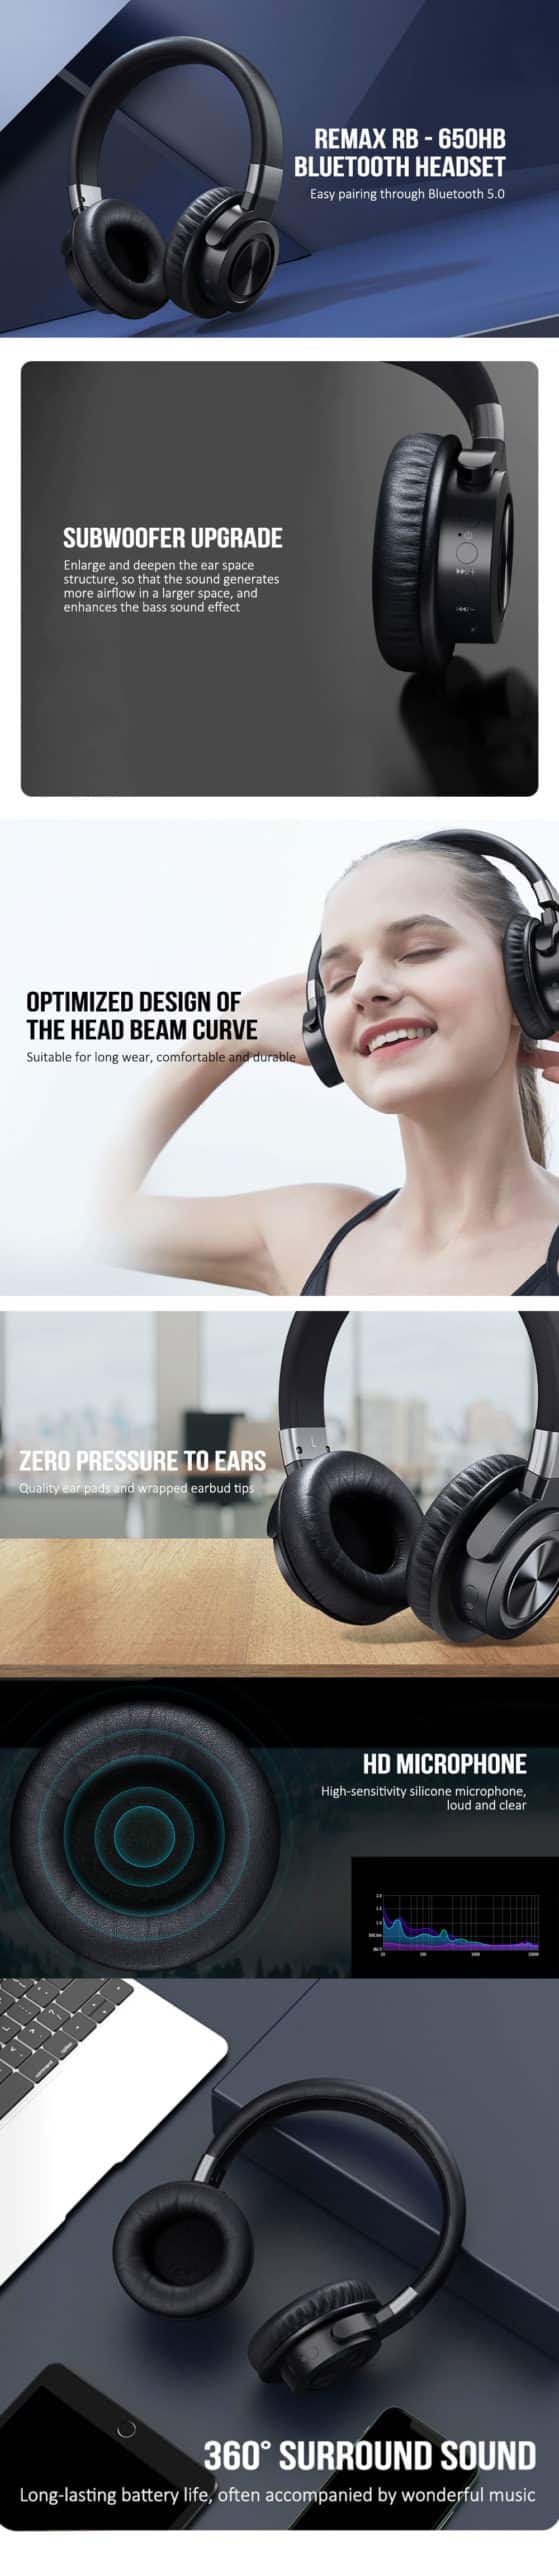 Remax RB 650HB Bluetooth 5.0 Headphone 1 scaled